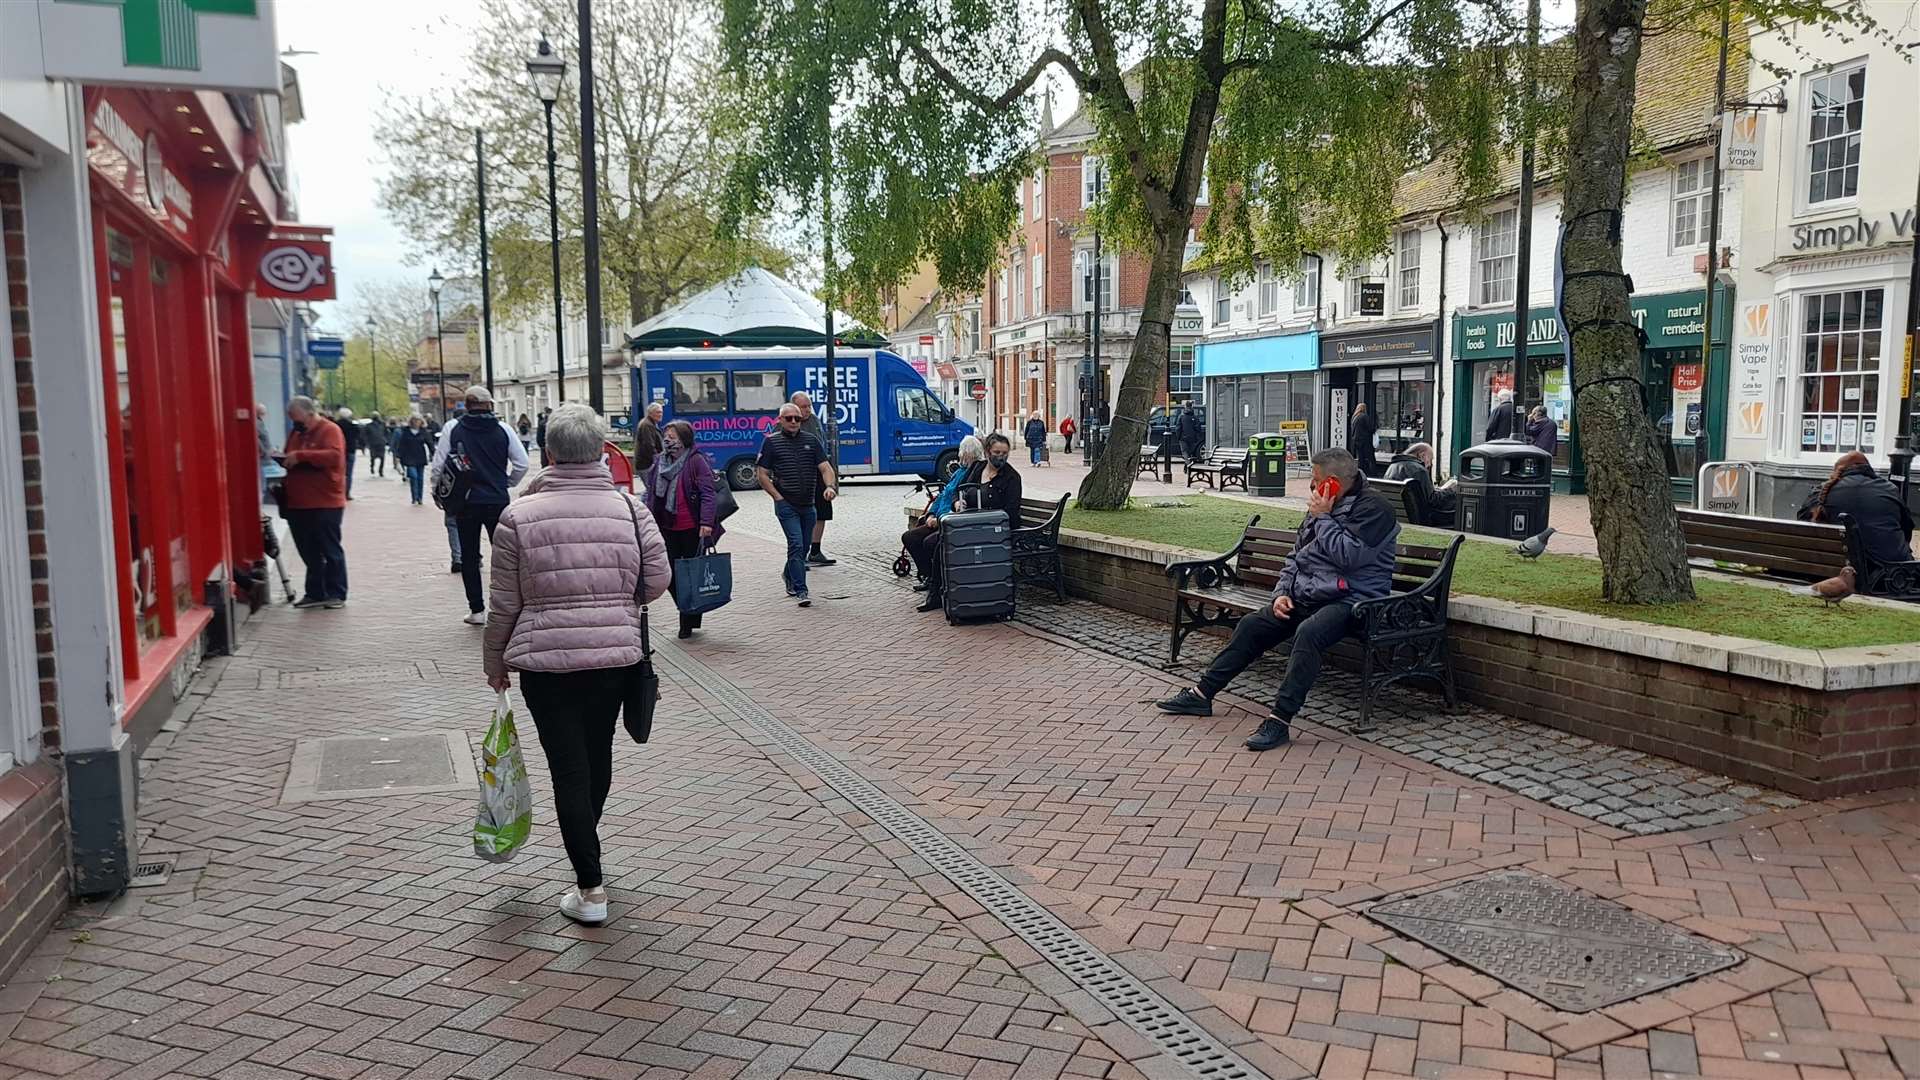 The high street is bustling with shoppers today despite the rain